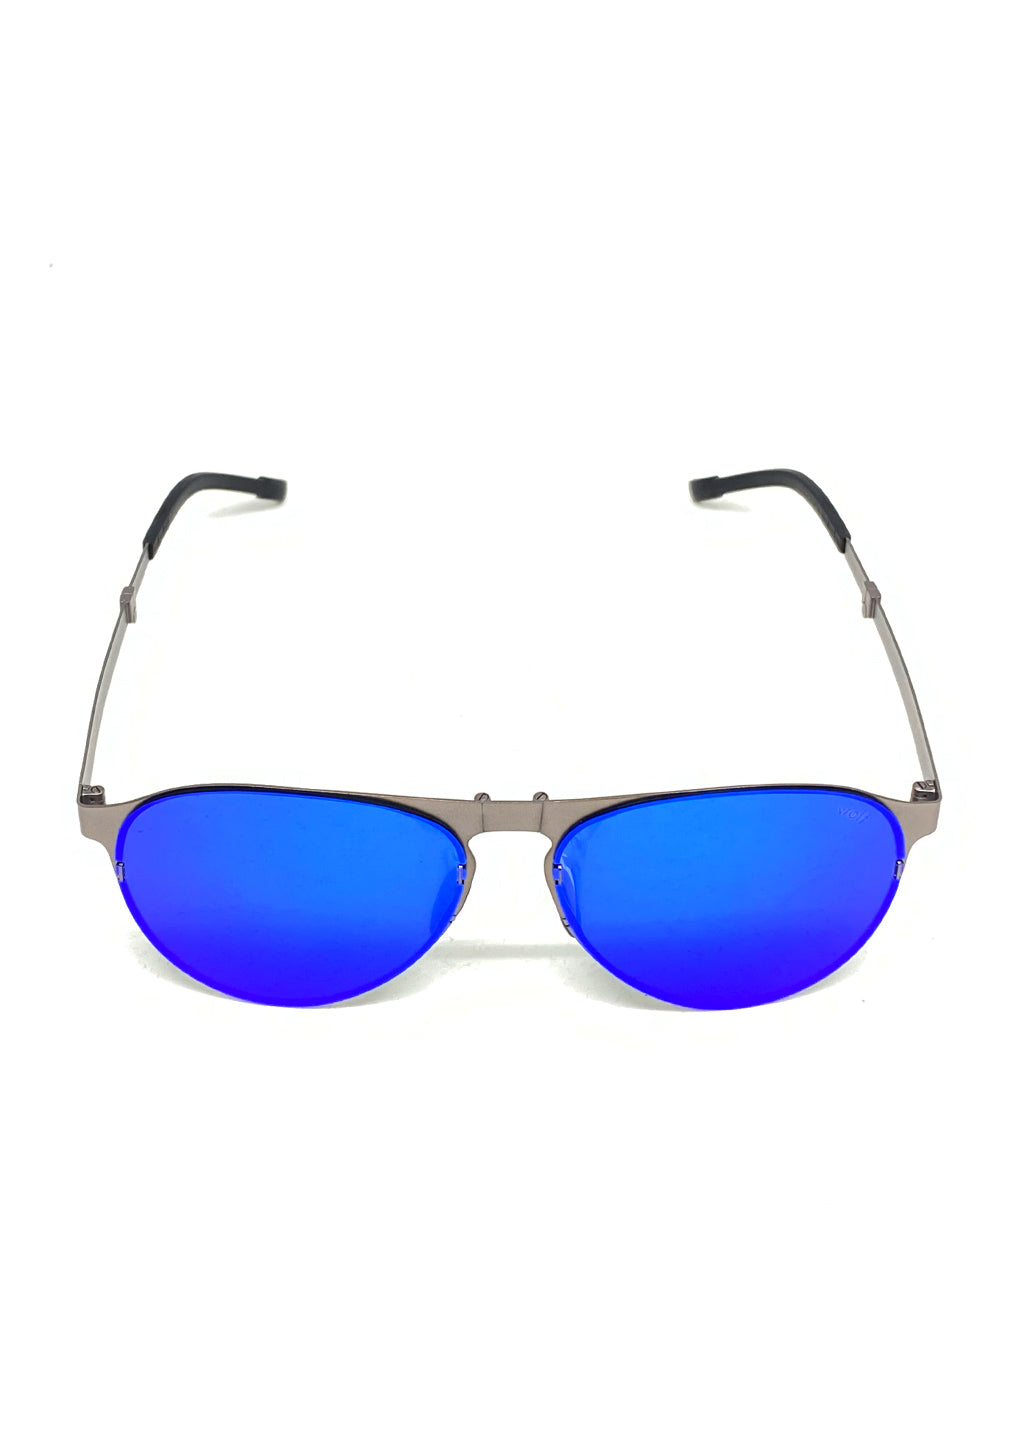 Foldable sunglasses - Scout classic aviator design - Front from above with blue lenses.